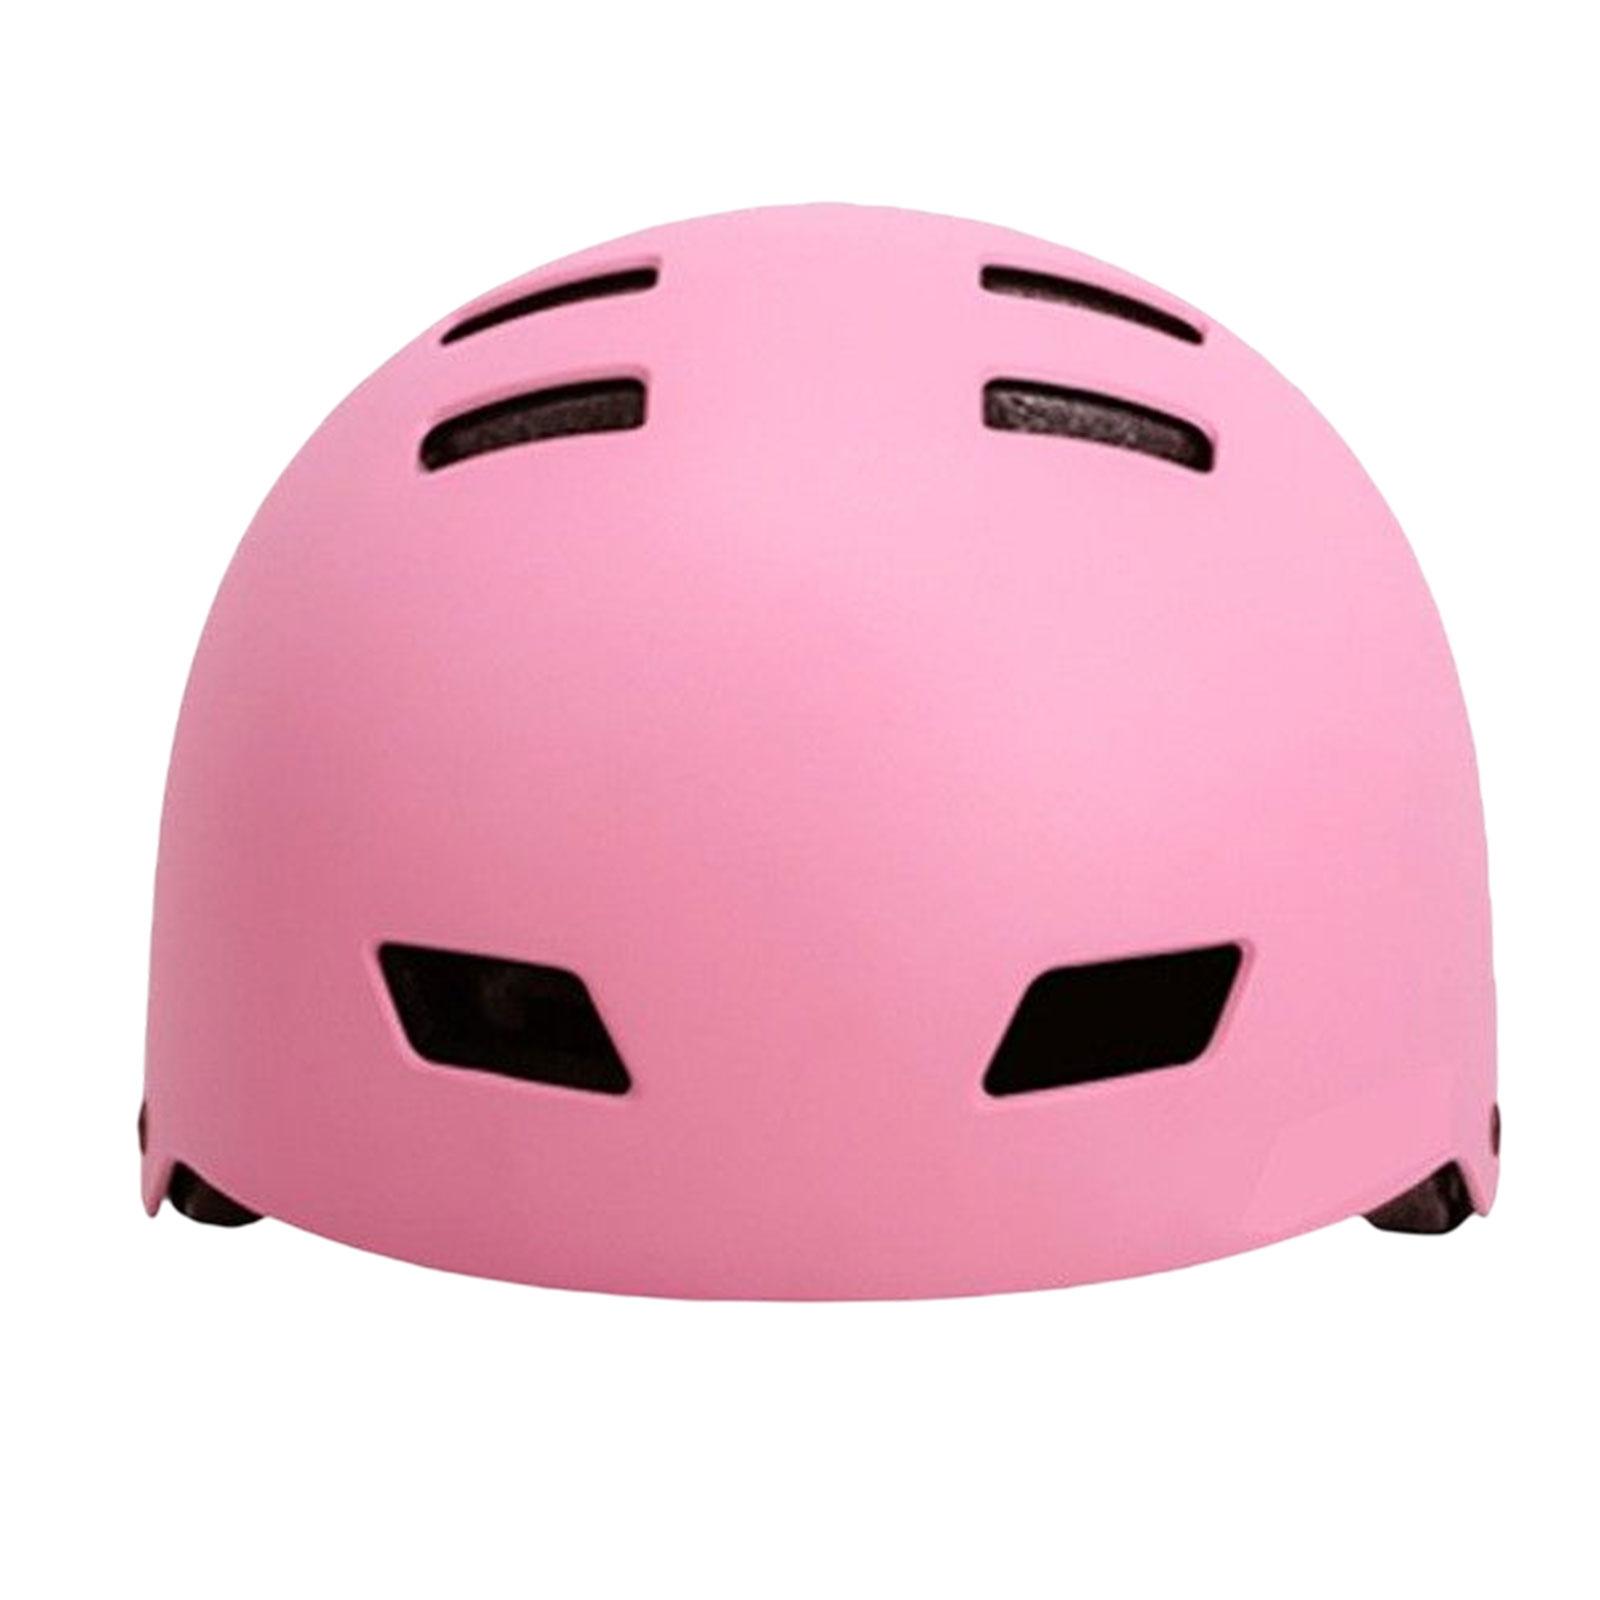 Bike Helmet Kids Portable Road Cycling Helmet for Child Youth Girls and Boys Pink